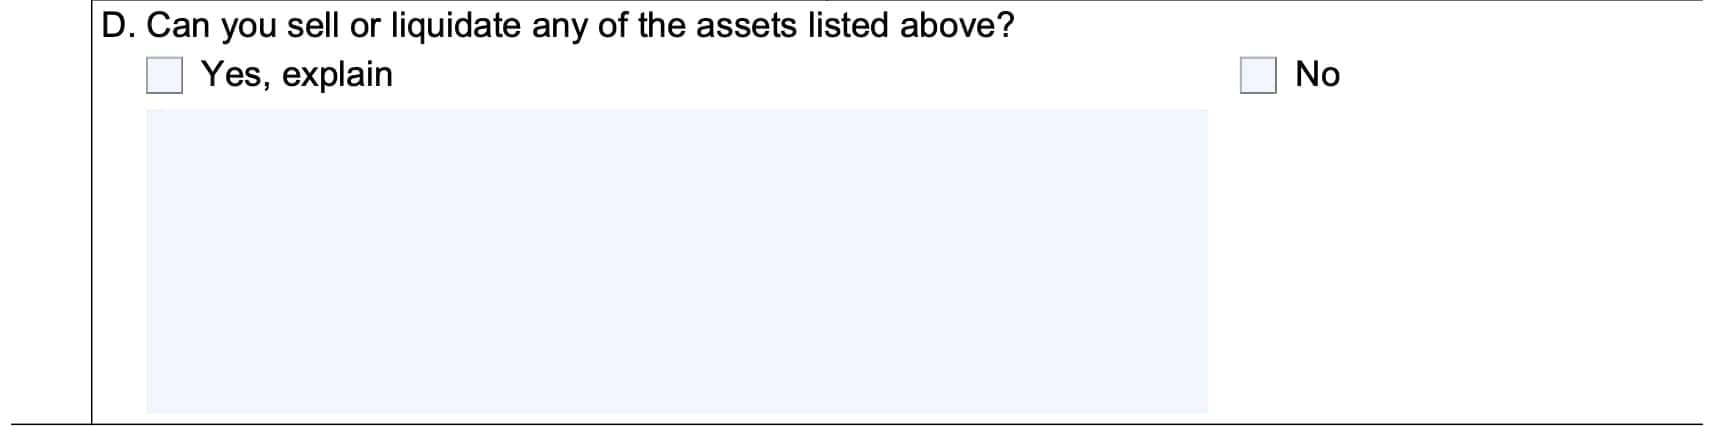 Question 10D: Can you sell or liquidate any of the assets above?